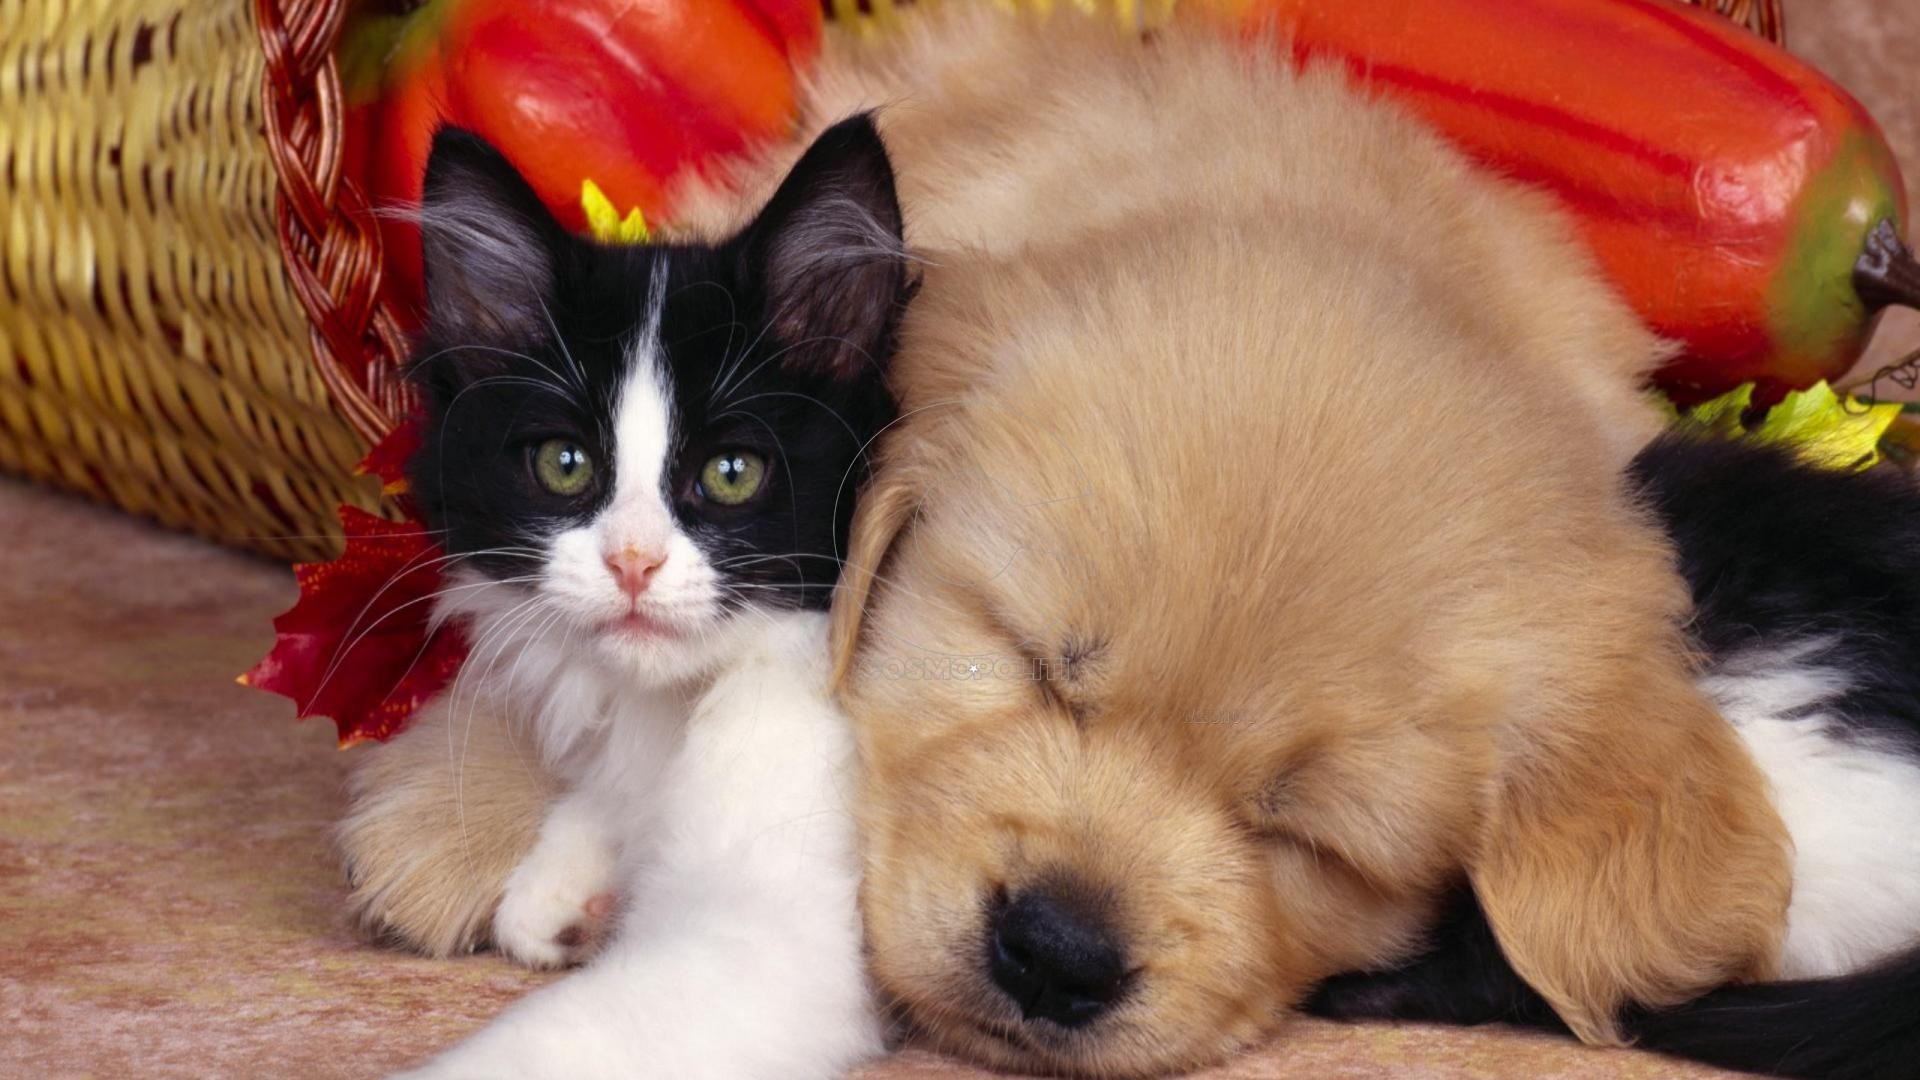 Cute-cats-dogs-pets-animals-1920x1080